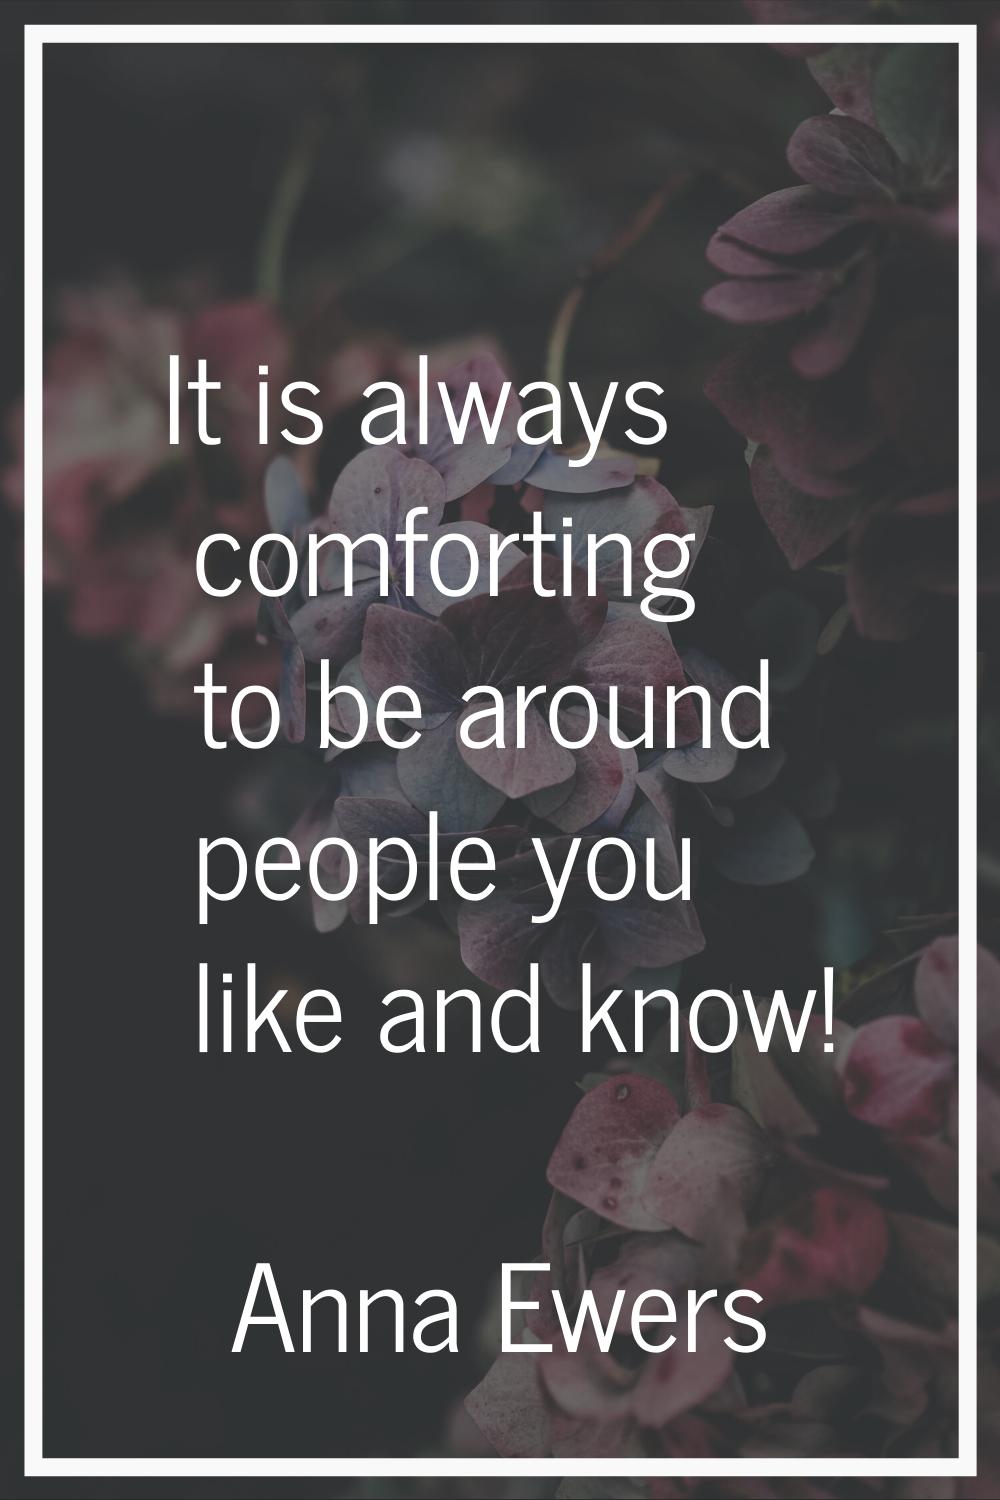 It is always comforting to be around people you like and know!